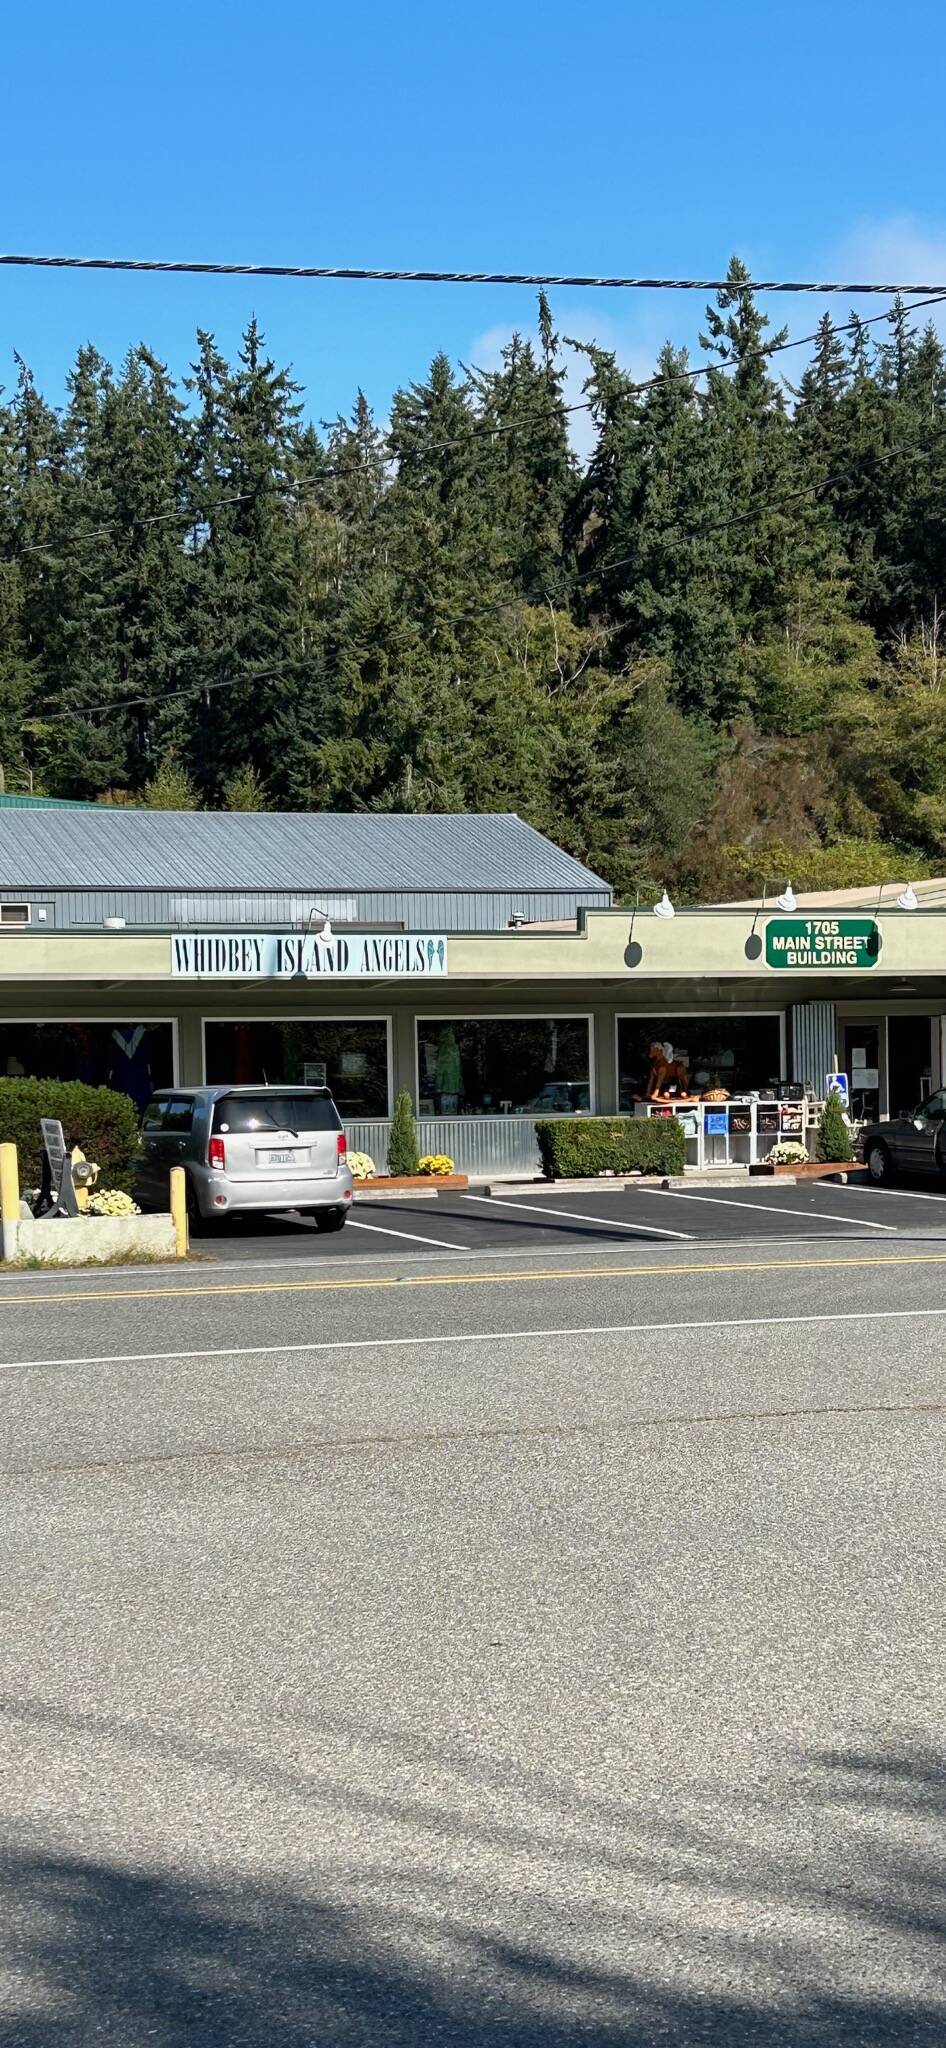 Whidbey Island Angels recently opened a resource center in a new, bigger location in Freeland. (Photo provided)